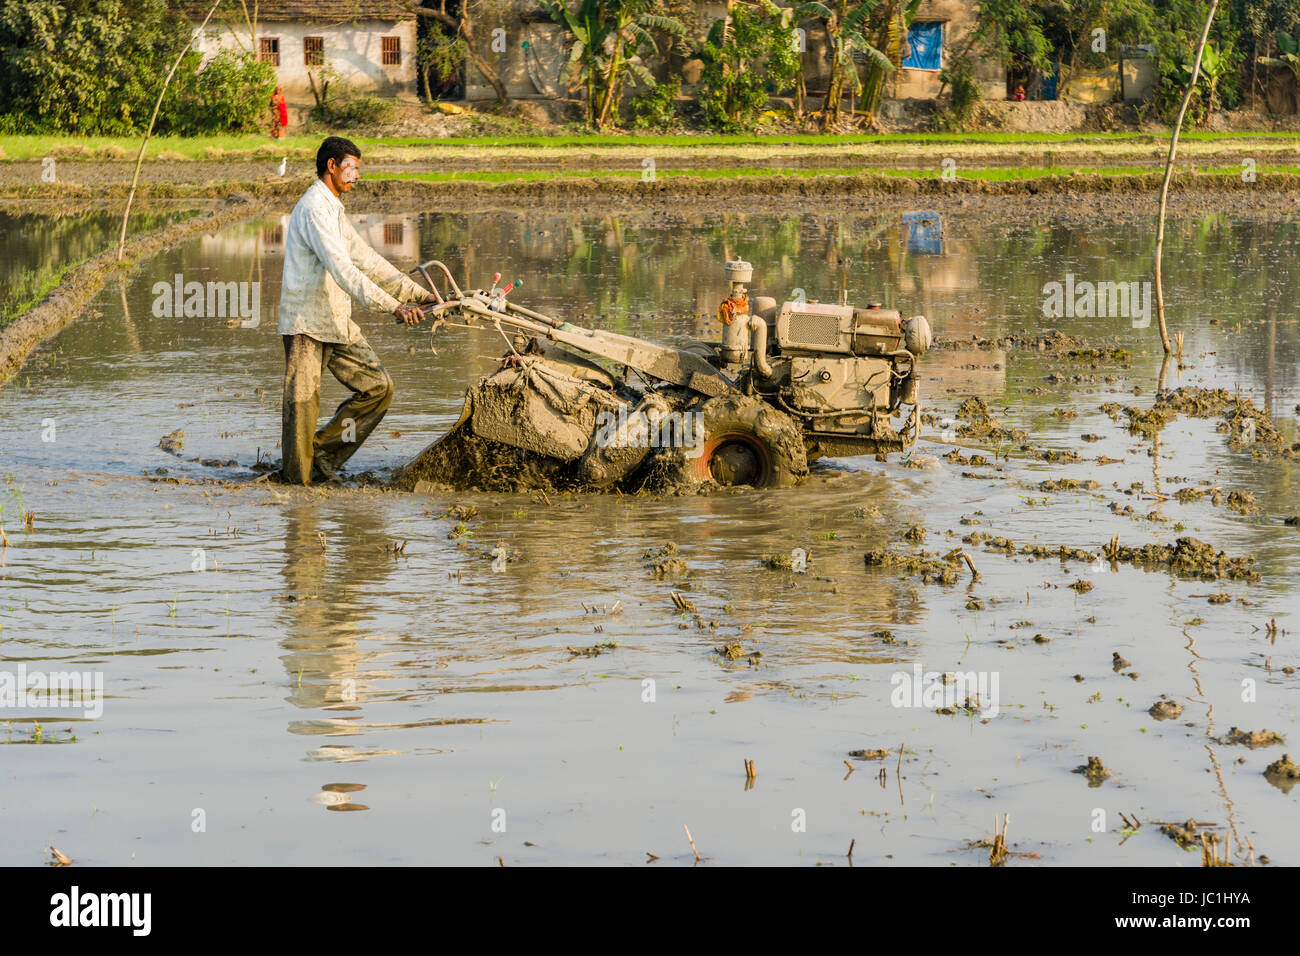 A farmer is working on a rice field with a rotary cultivator in the rural surroundings of the suburb New Town Stock Photo